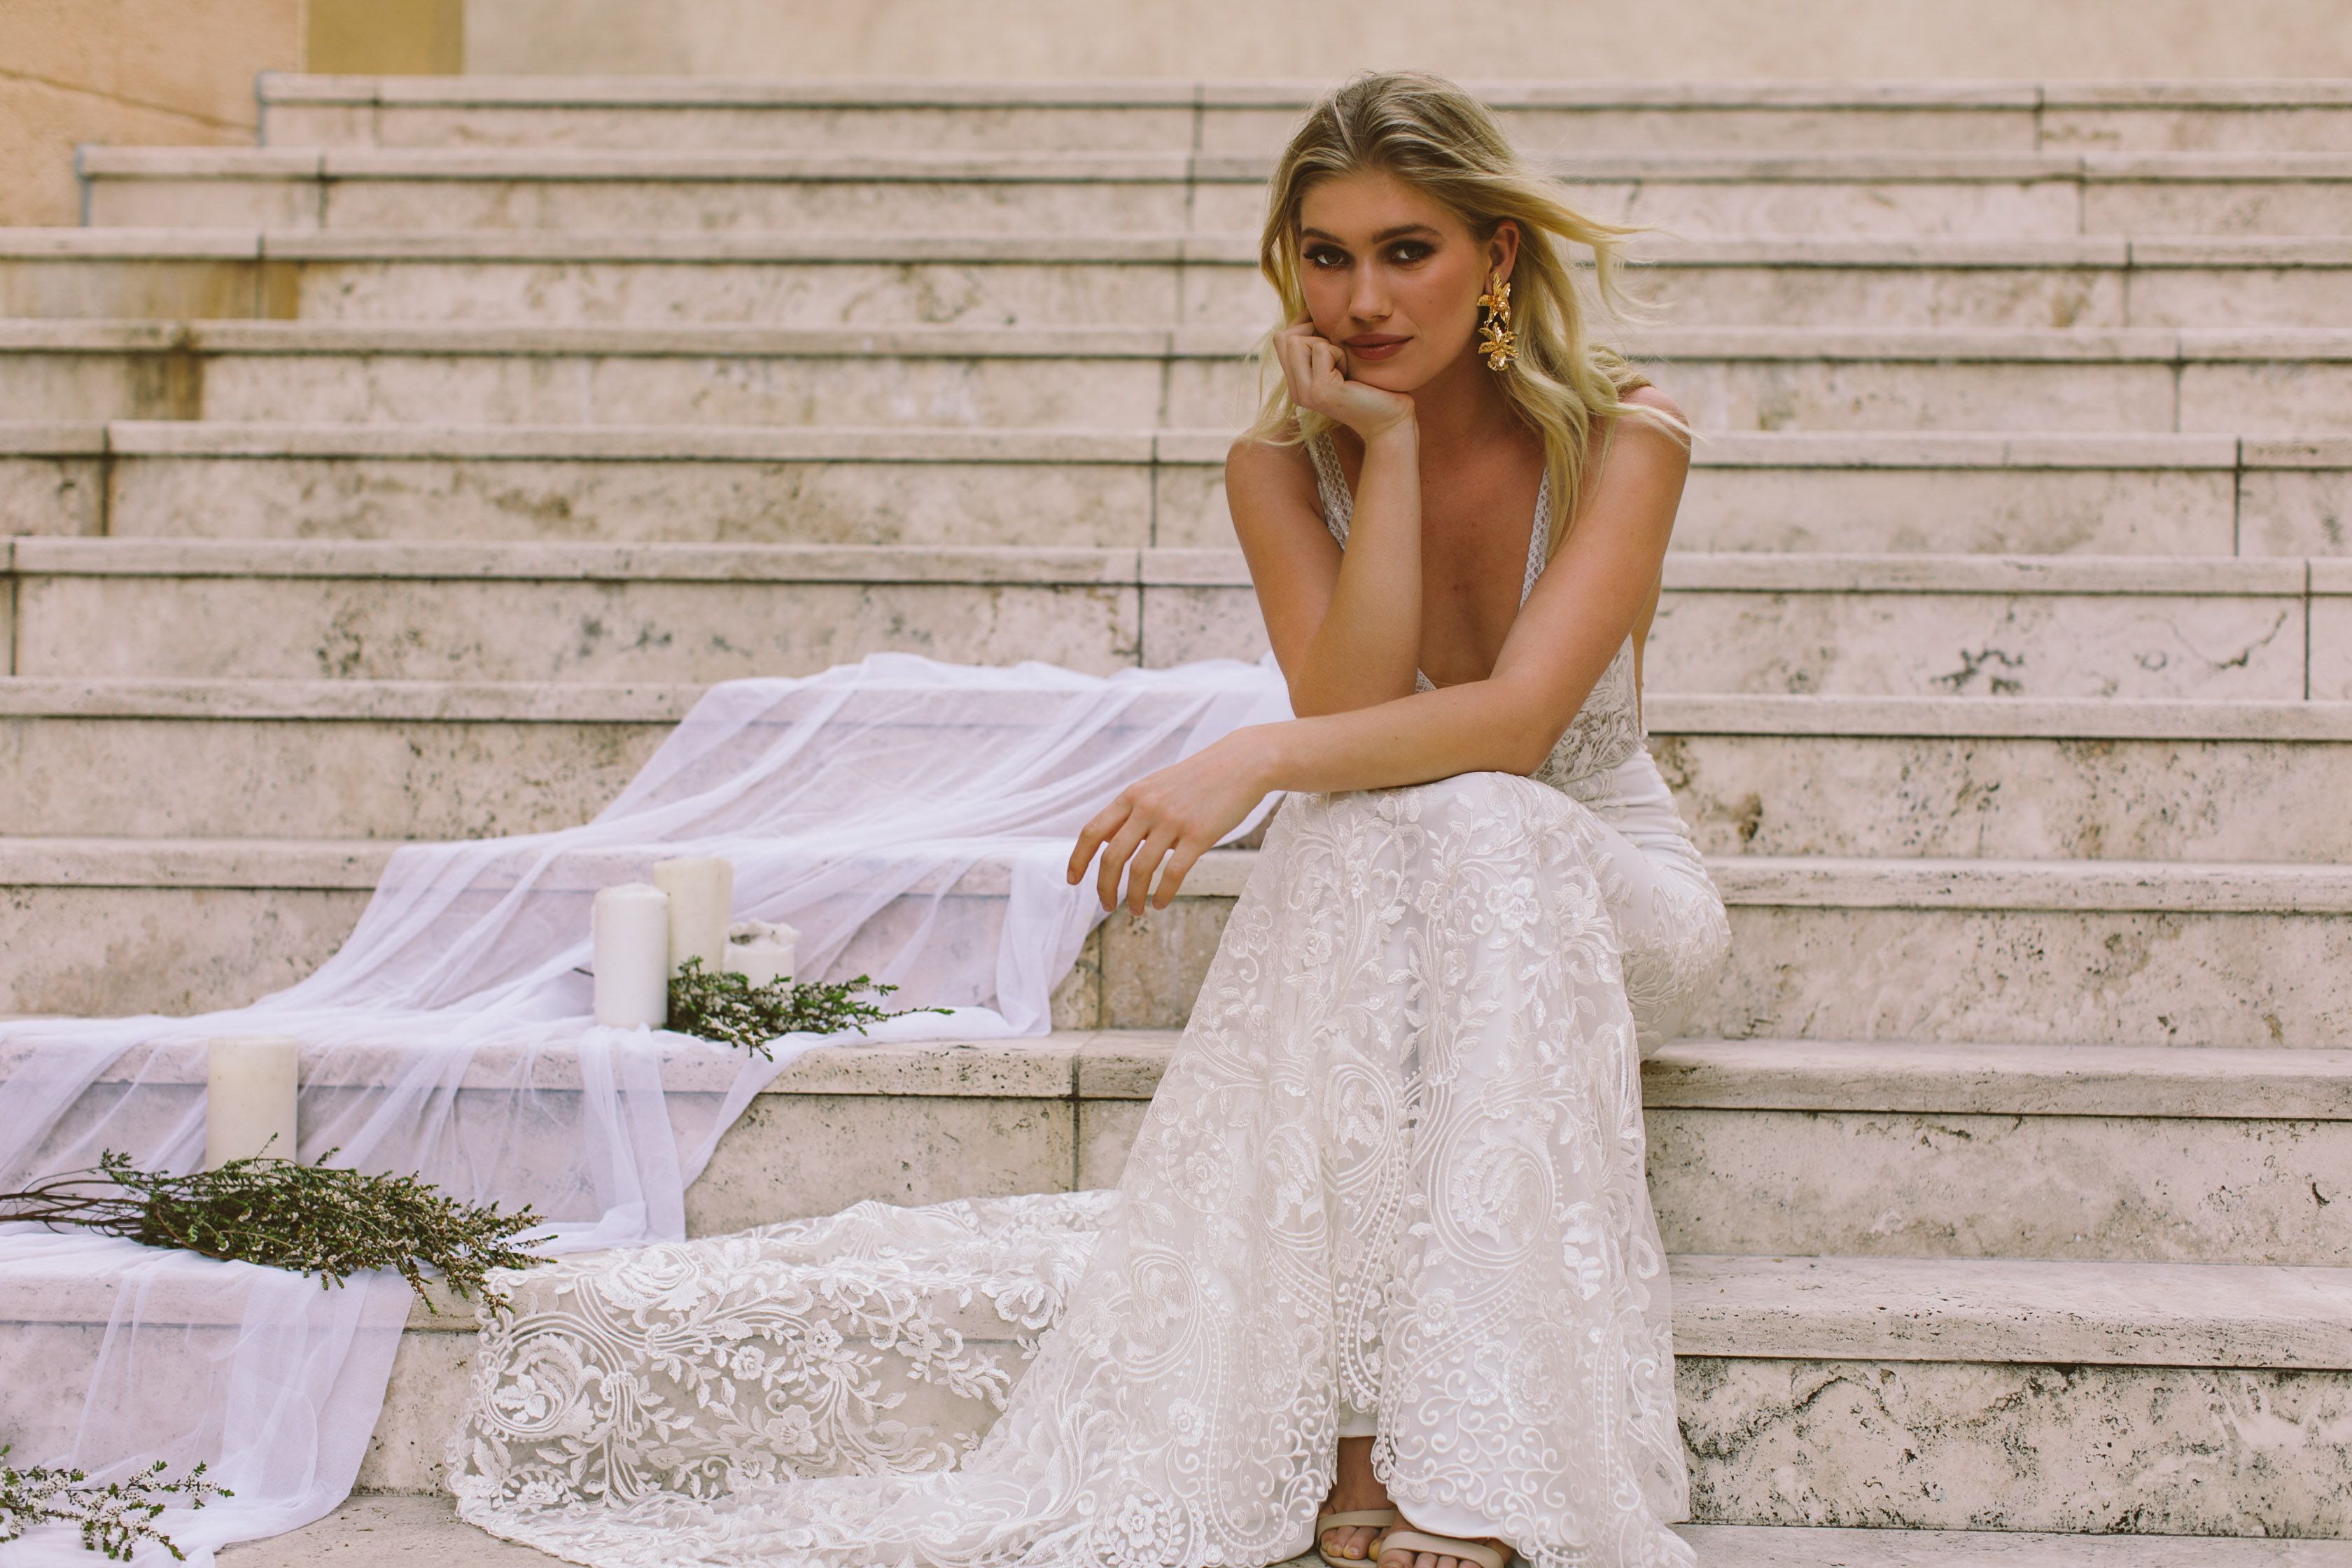 Rome inspired photoshoot - Made With Love Unique Bridal